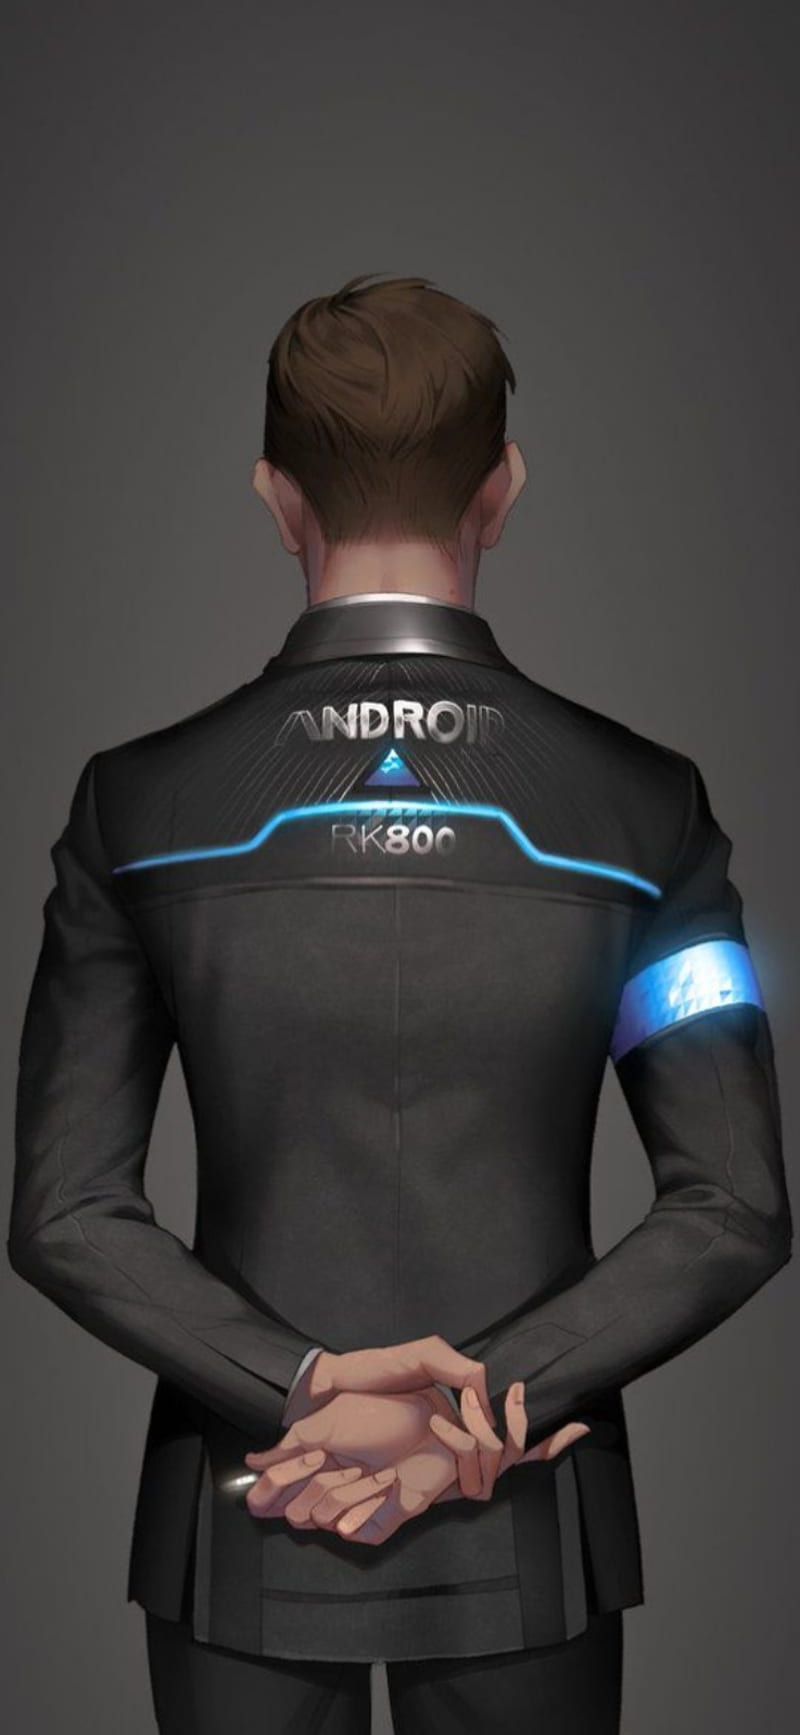 Download Detroit Become Human Connor Wallpaper